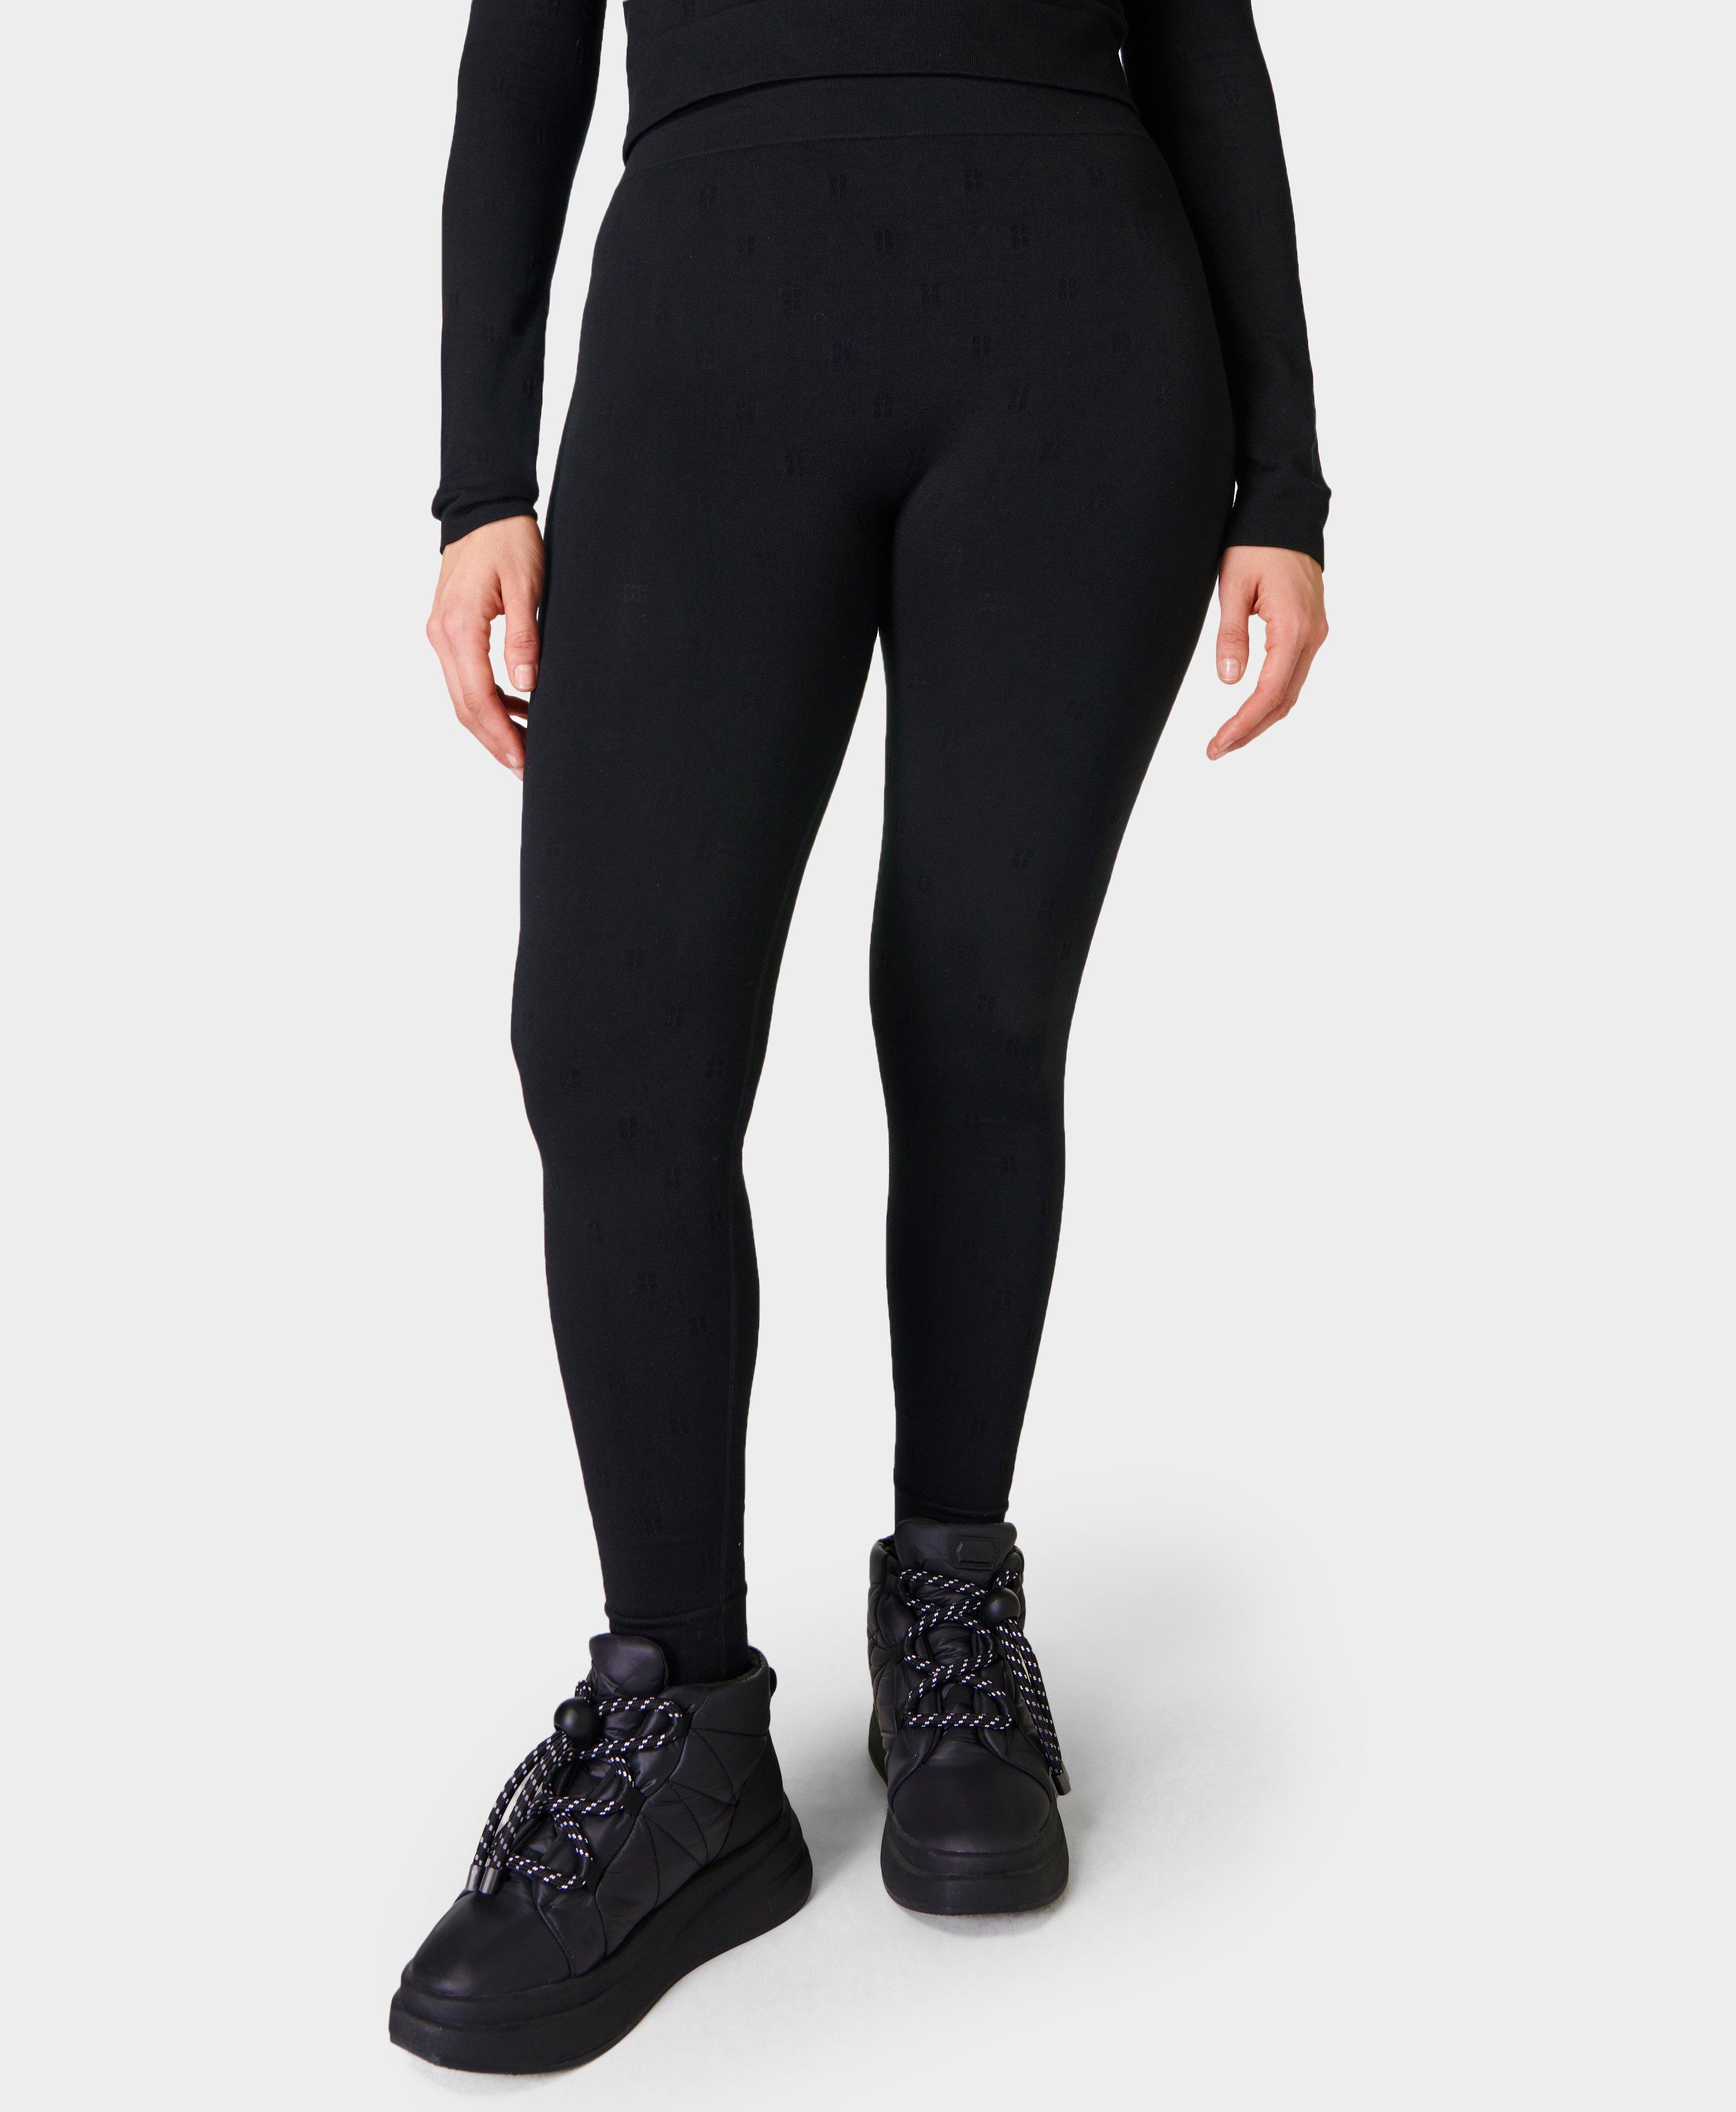 Women's Base Layers, Leggings & Thermals For Ski & Snowboard On Sale -  Cheap Snow Gear